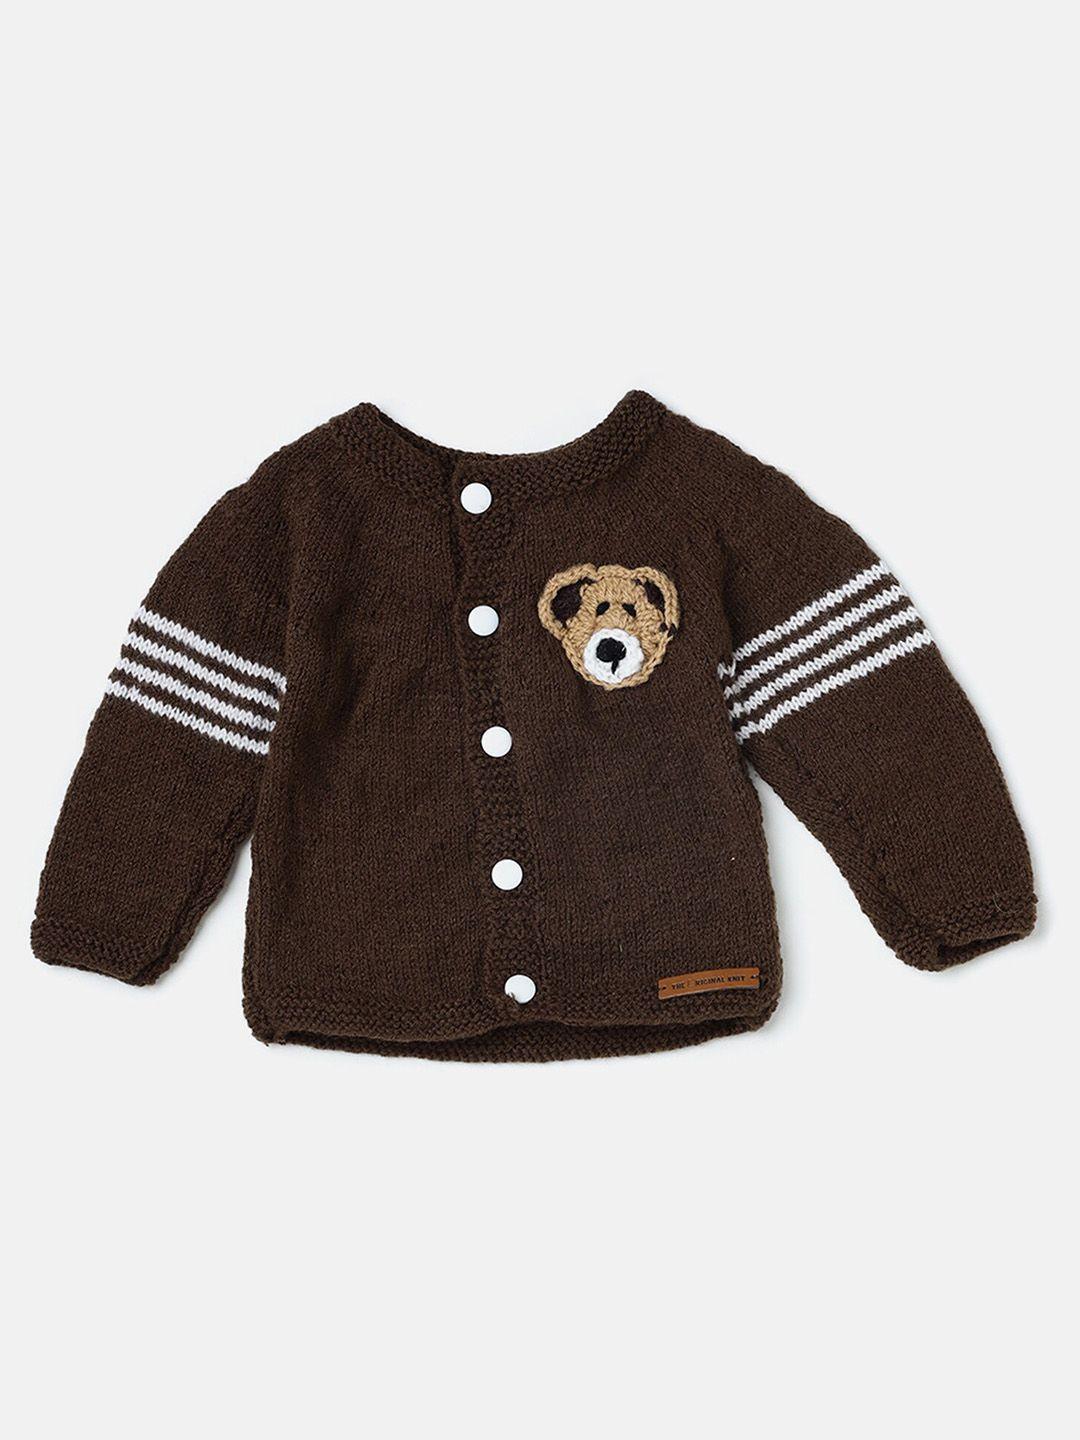 the original knit unisex kids brown & white embroidered cardigan with embroidered detail